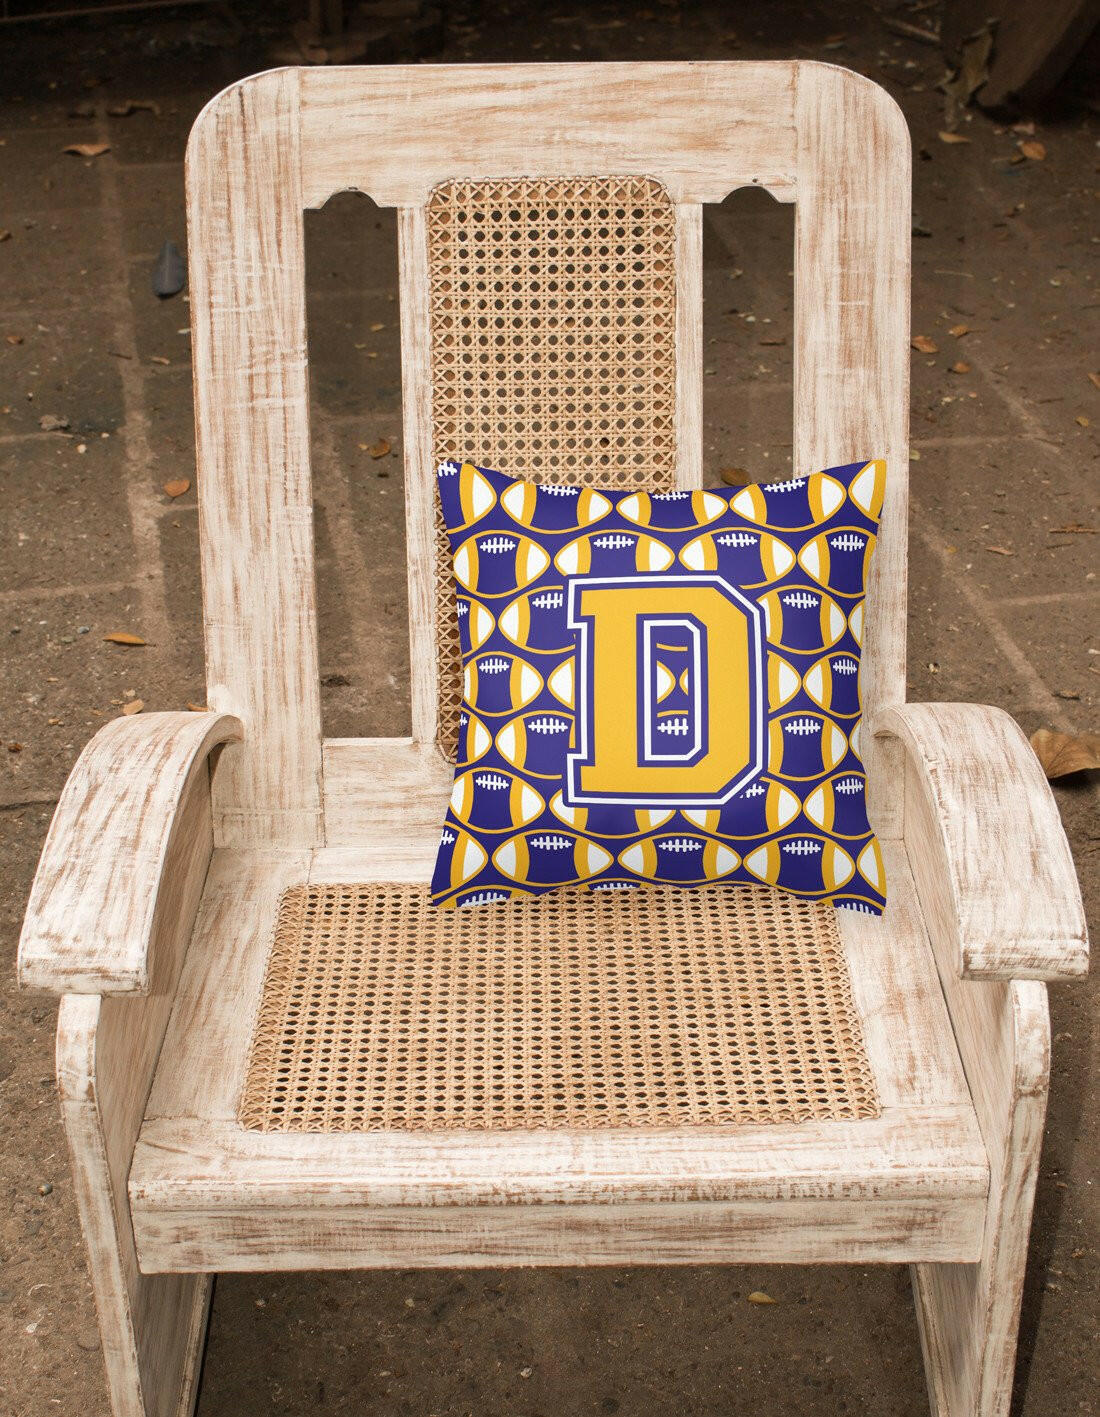 Letter D Football Purple and Gold Fabric Decorative Pillow CJ1064-DPW1414 by Caroline's Treasures